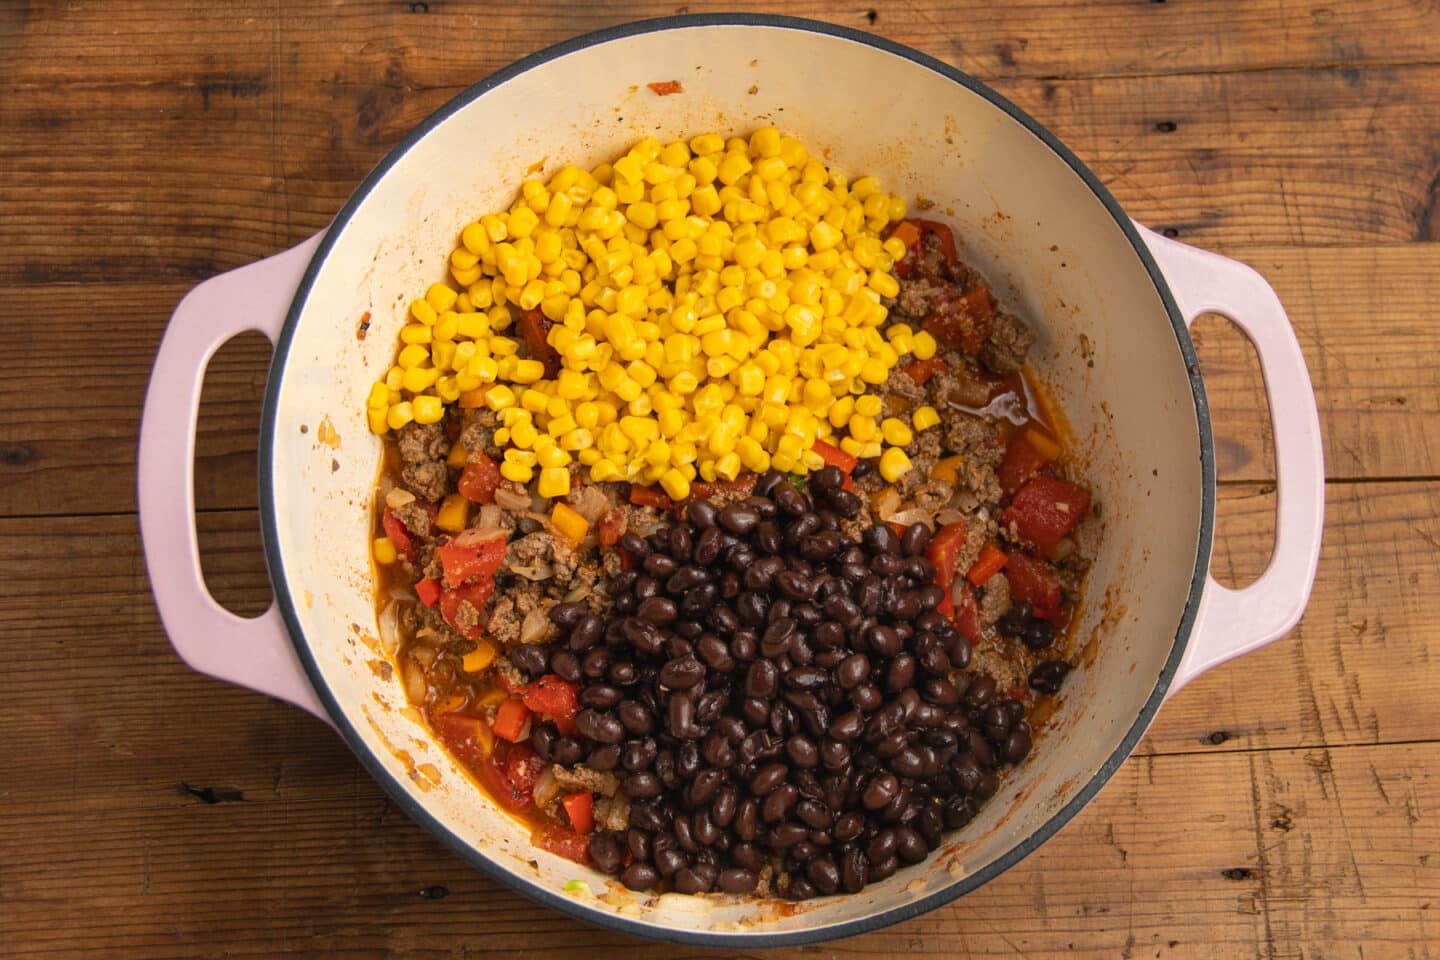 This is a picture of the pot with the corn and beans added to the soup.